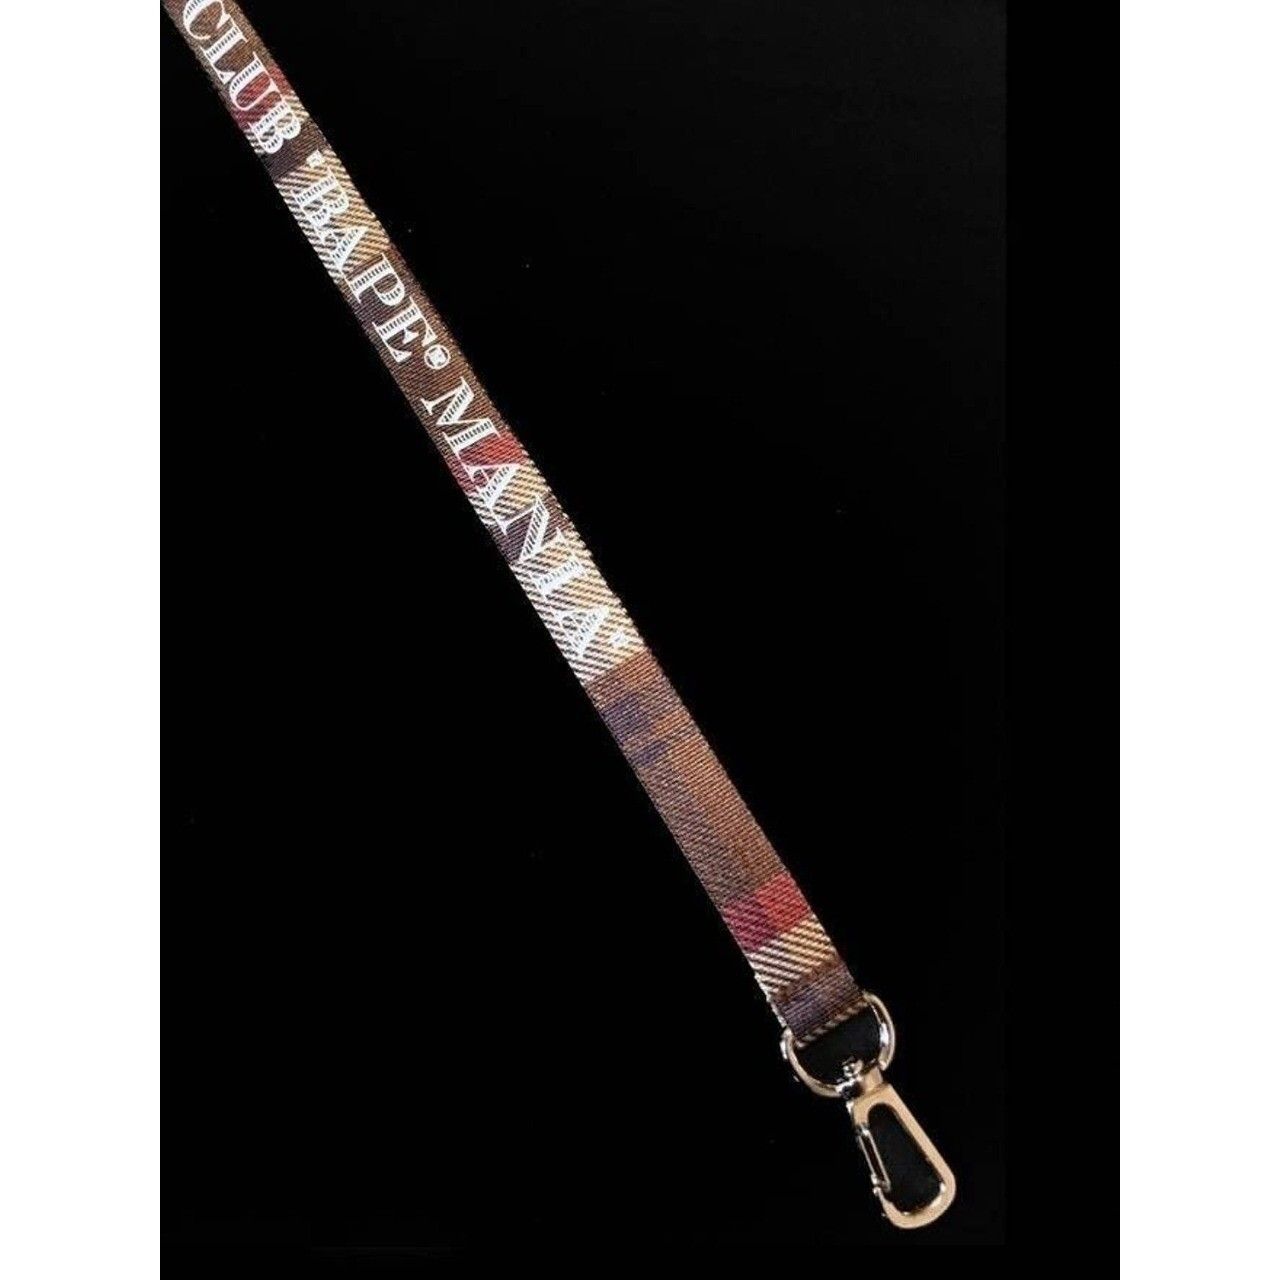 Pre-owned Bape X Vintage Bape Mania Lanyard Neck Strap Keychain Necklace In Burgundy